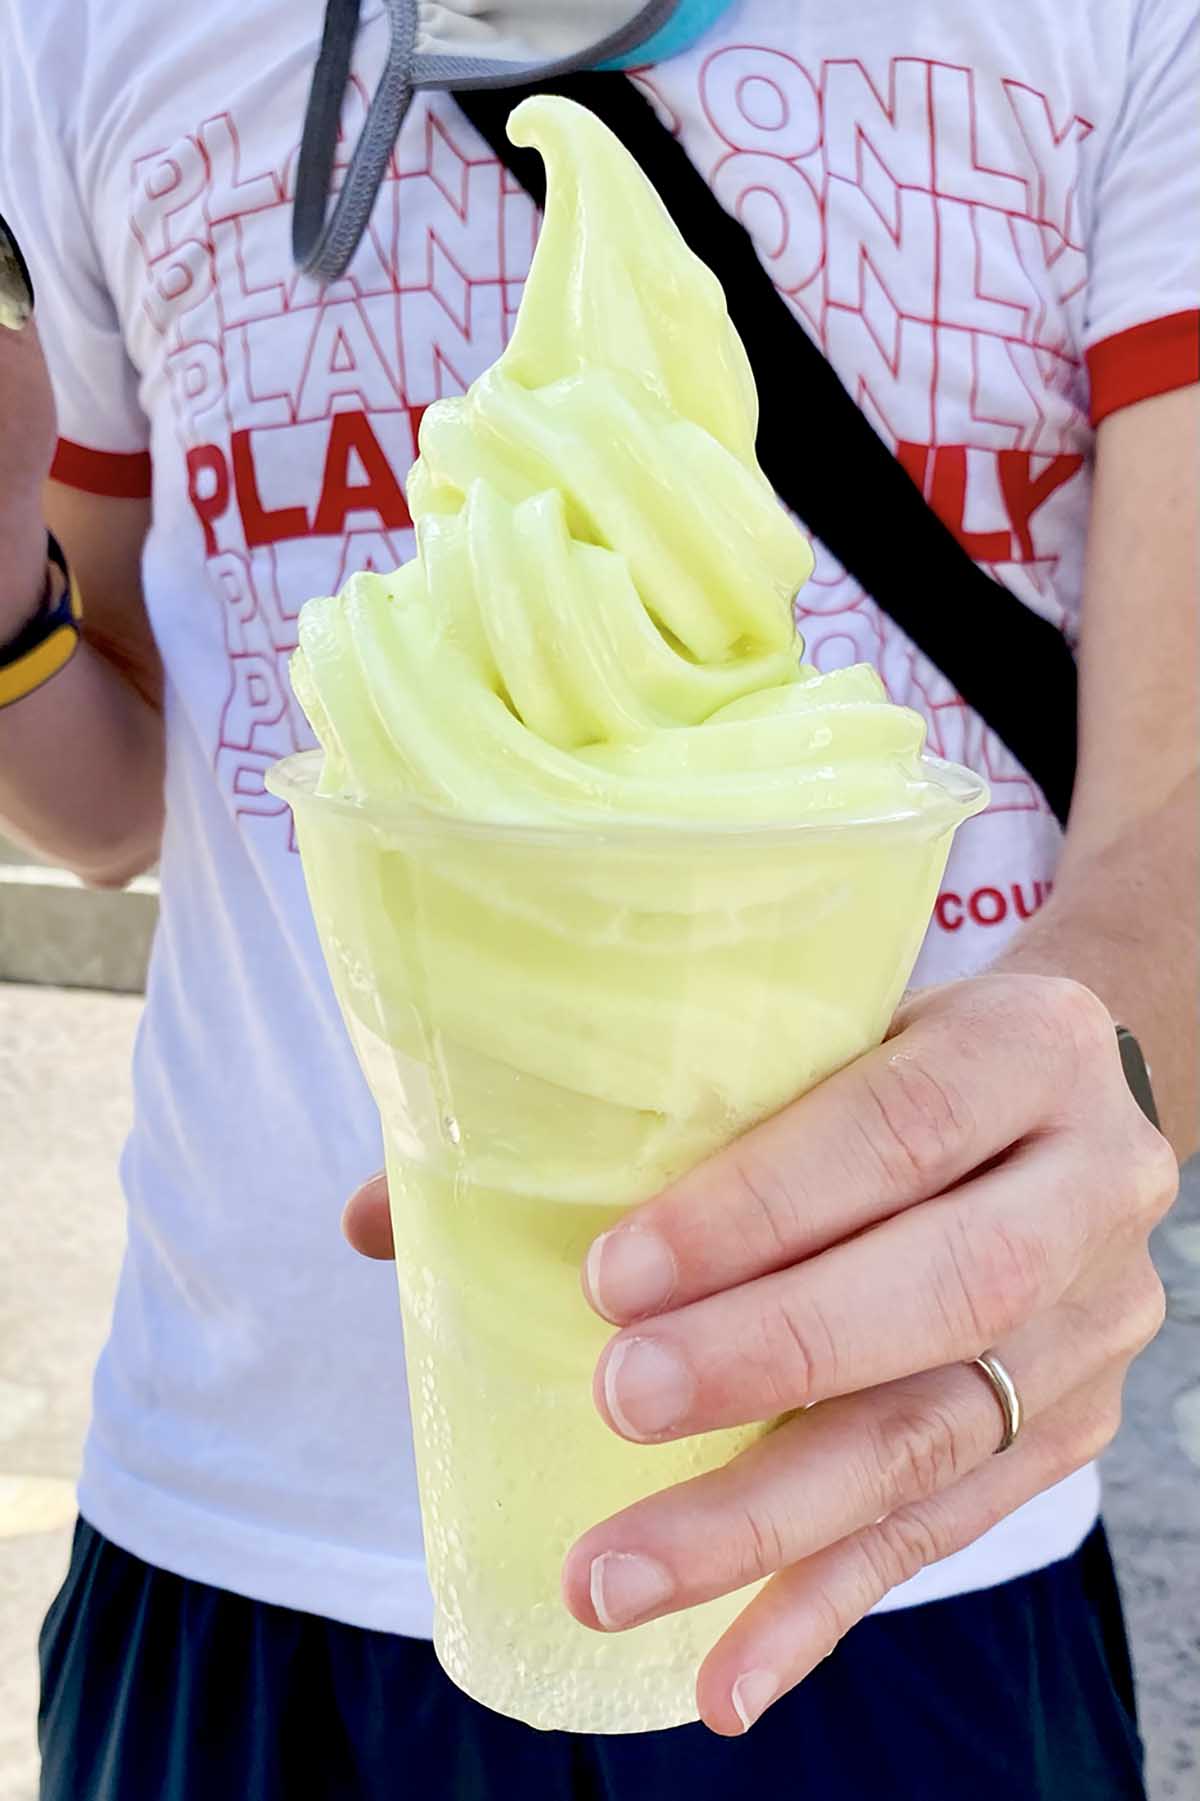 person in a shirt that says, "Plants Only" holding a green ice cream float